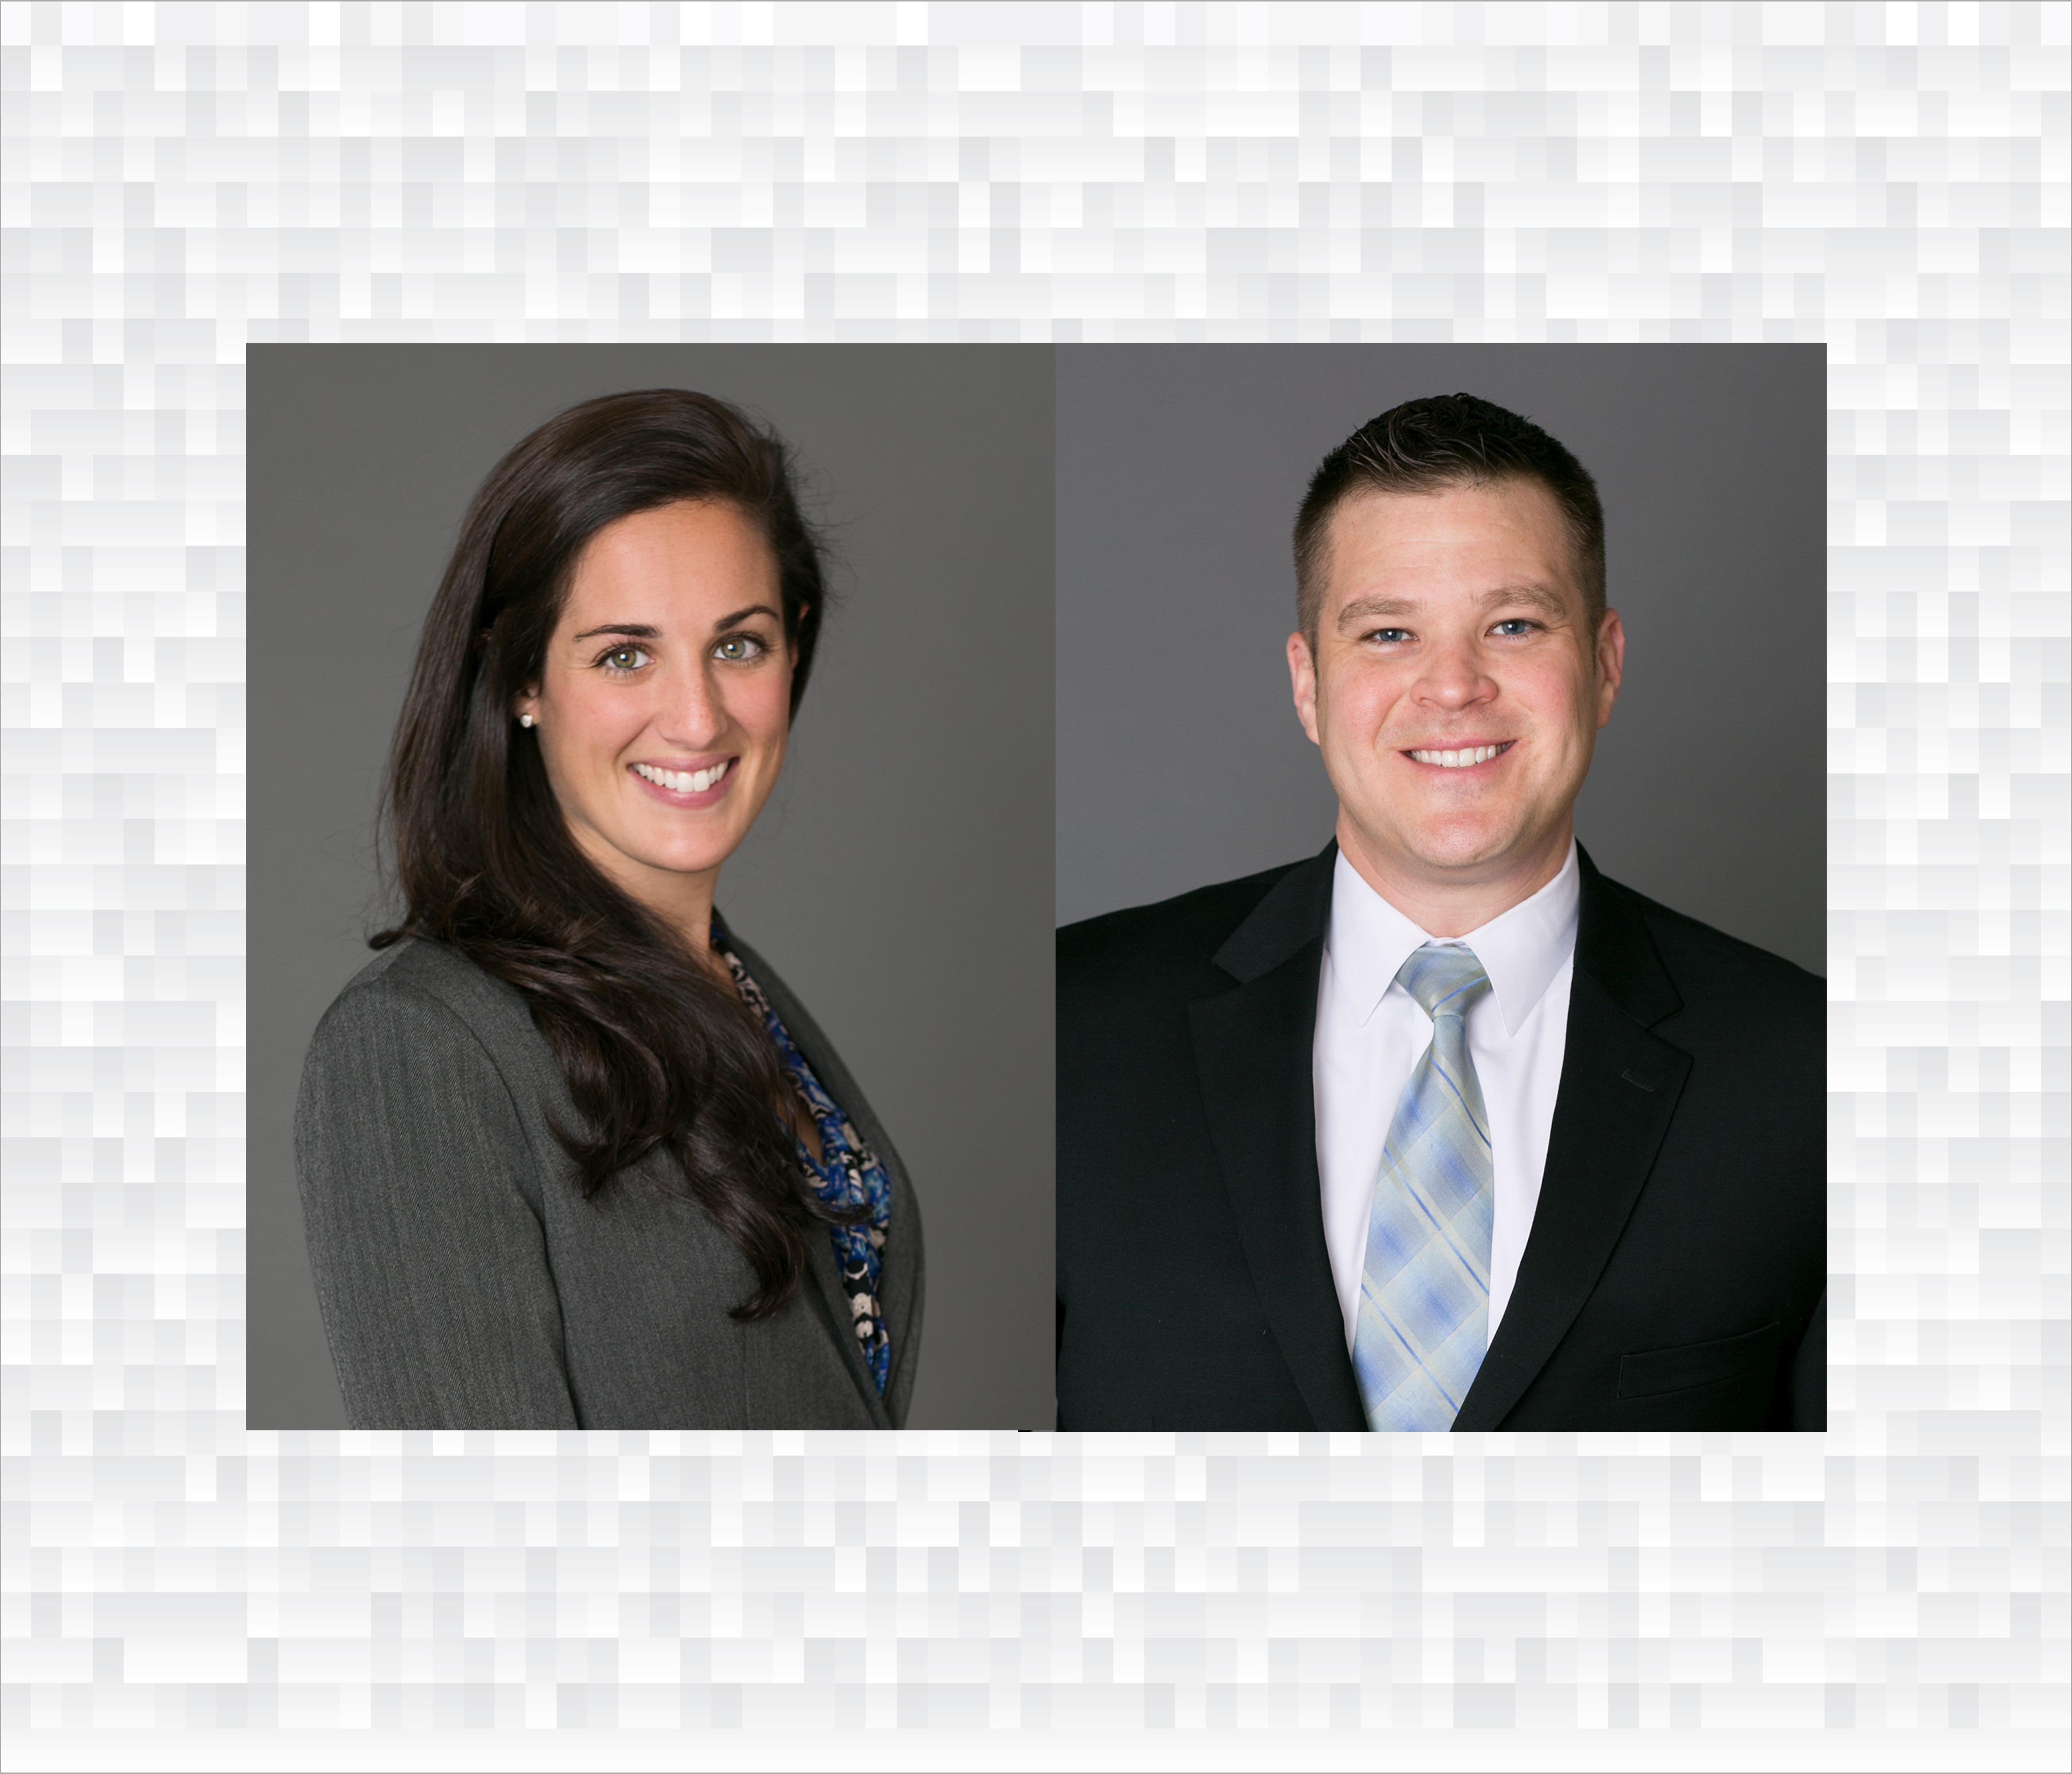 Connecticut Movers: Knowledge sharing and New Hires